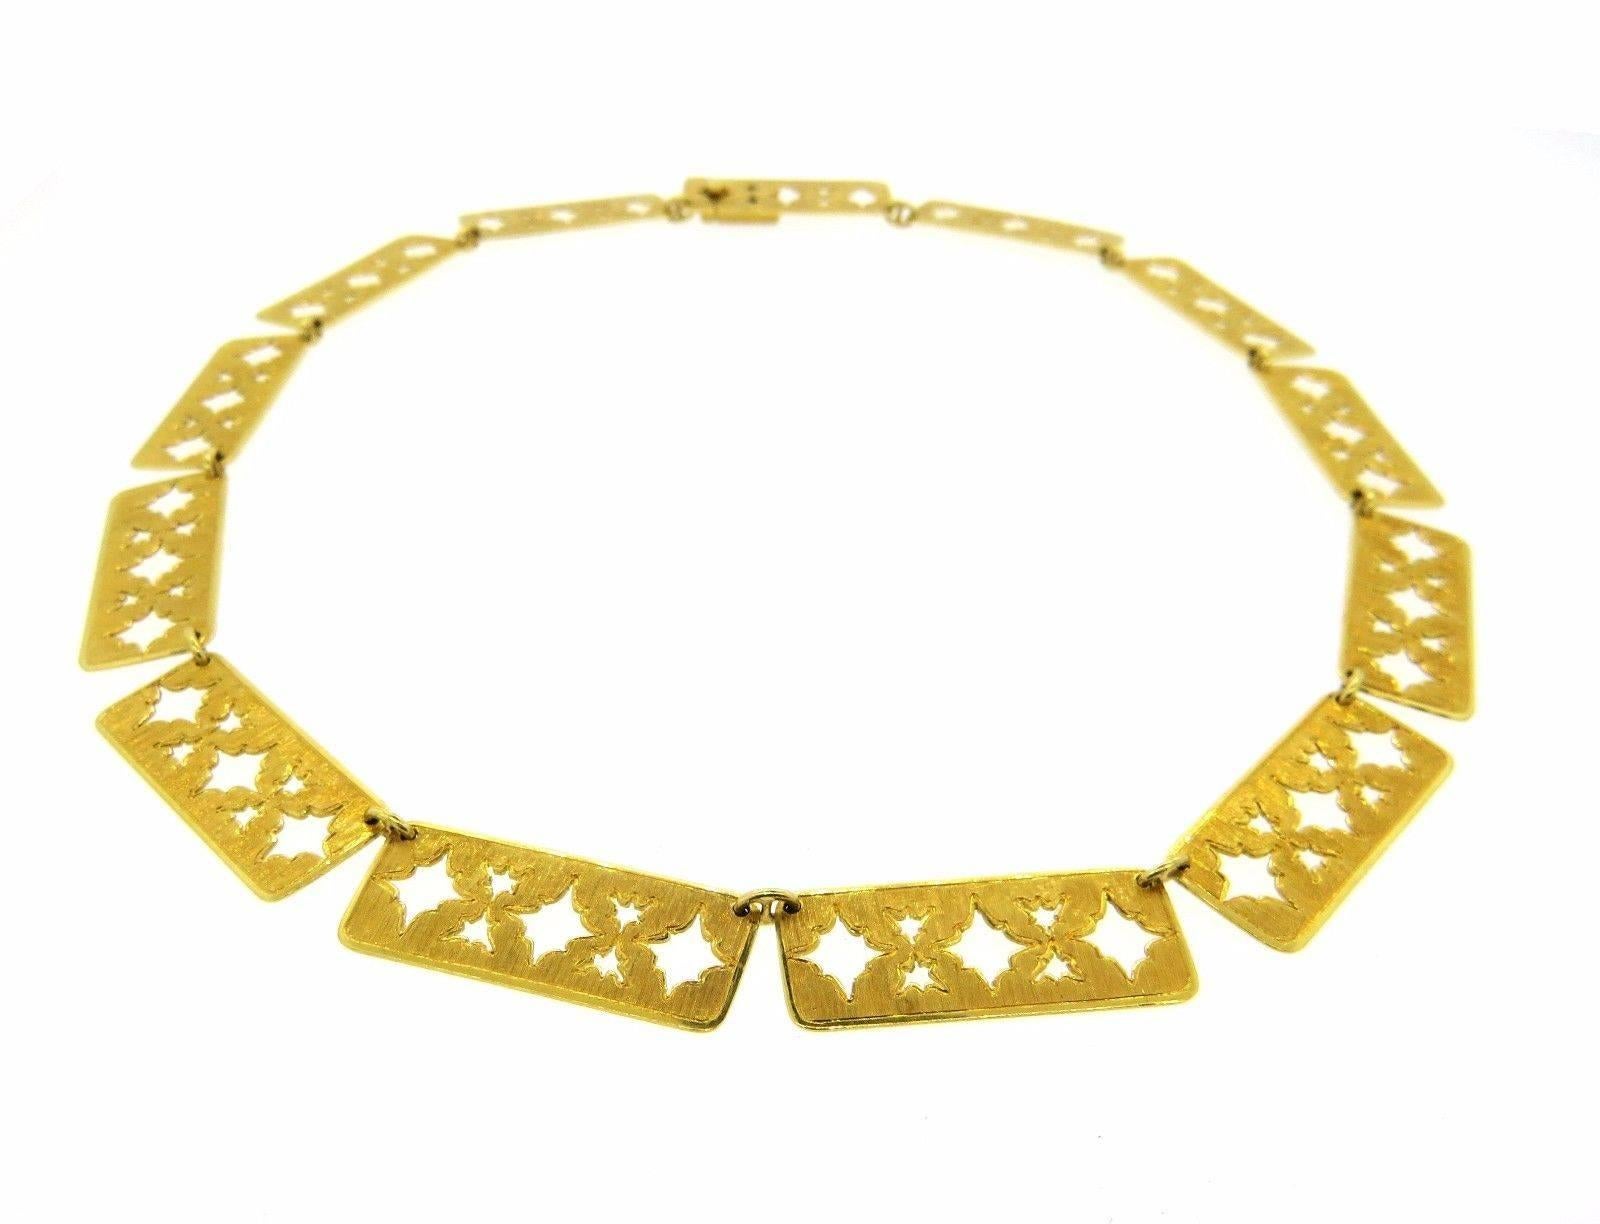 An 18k yellow gold necklace by Gianmaria Buccellati.  The necklace measures 16